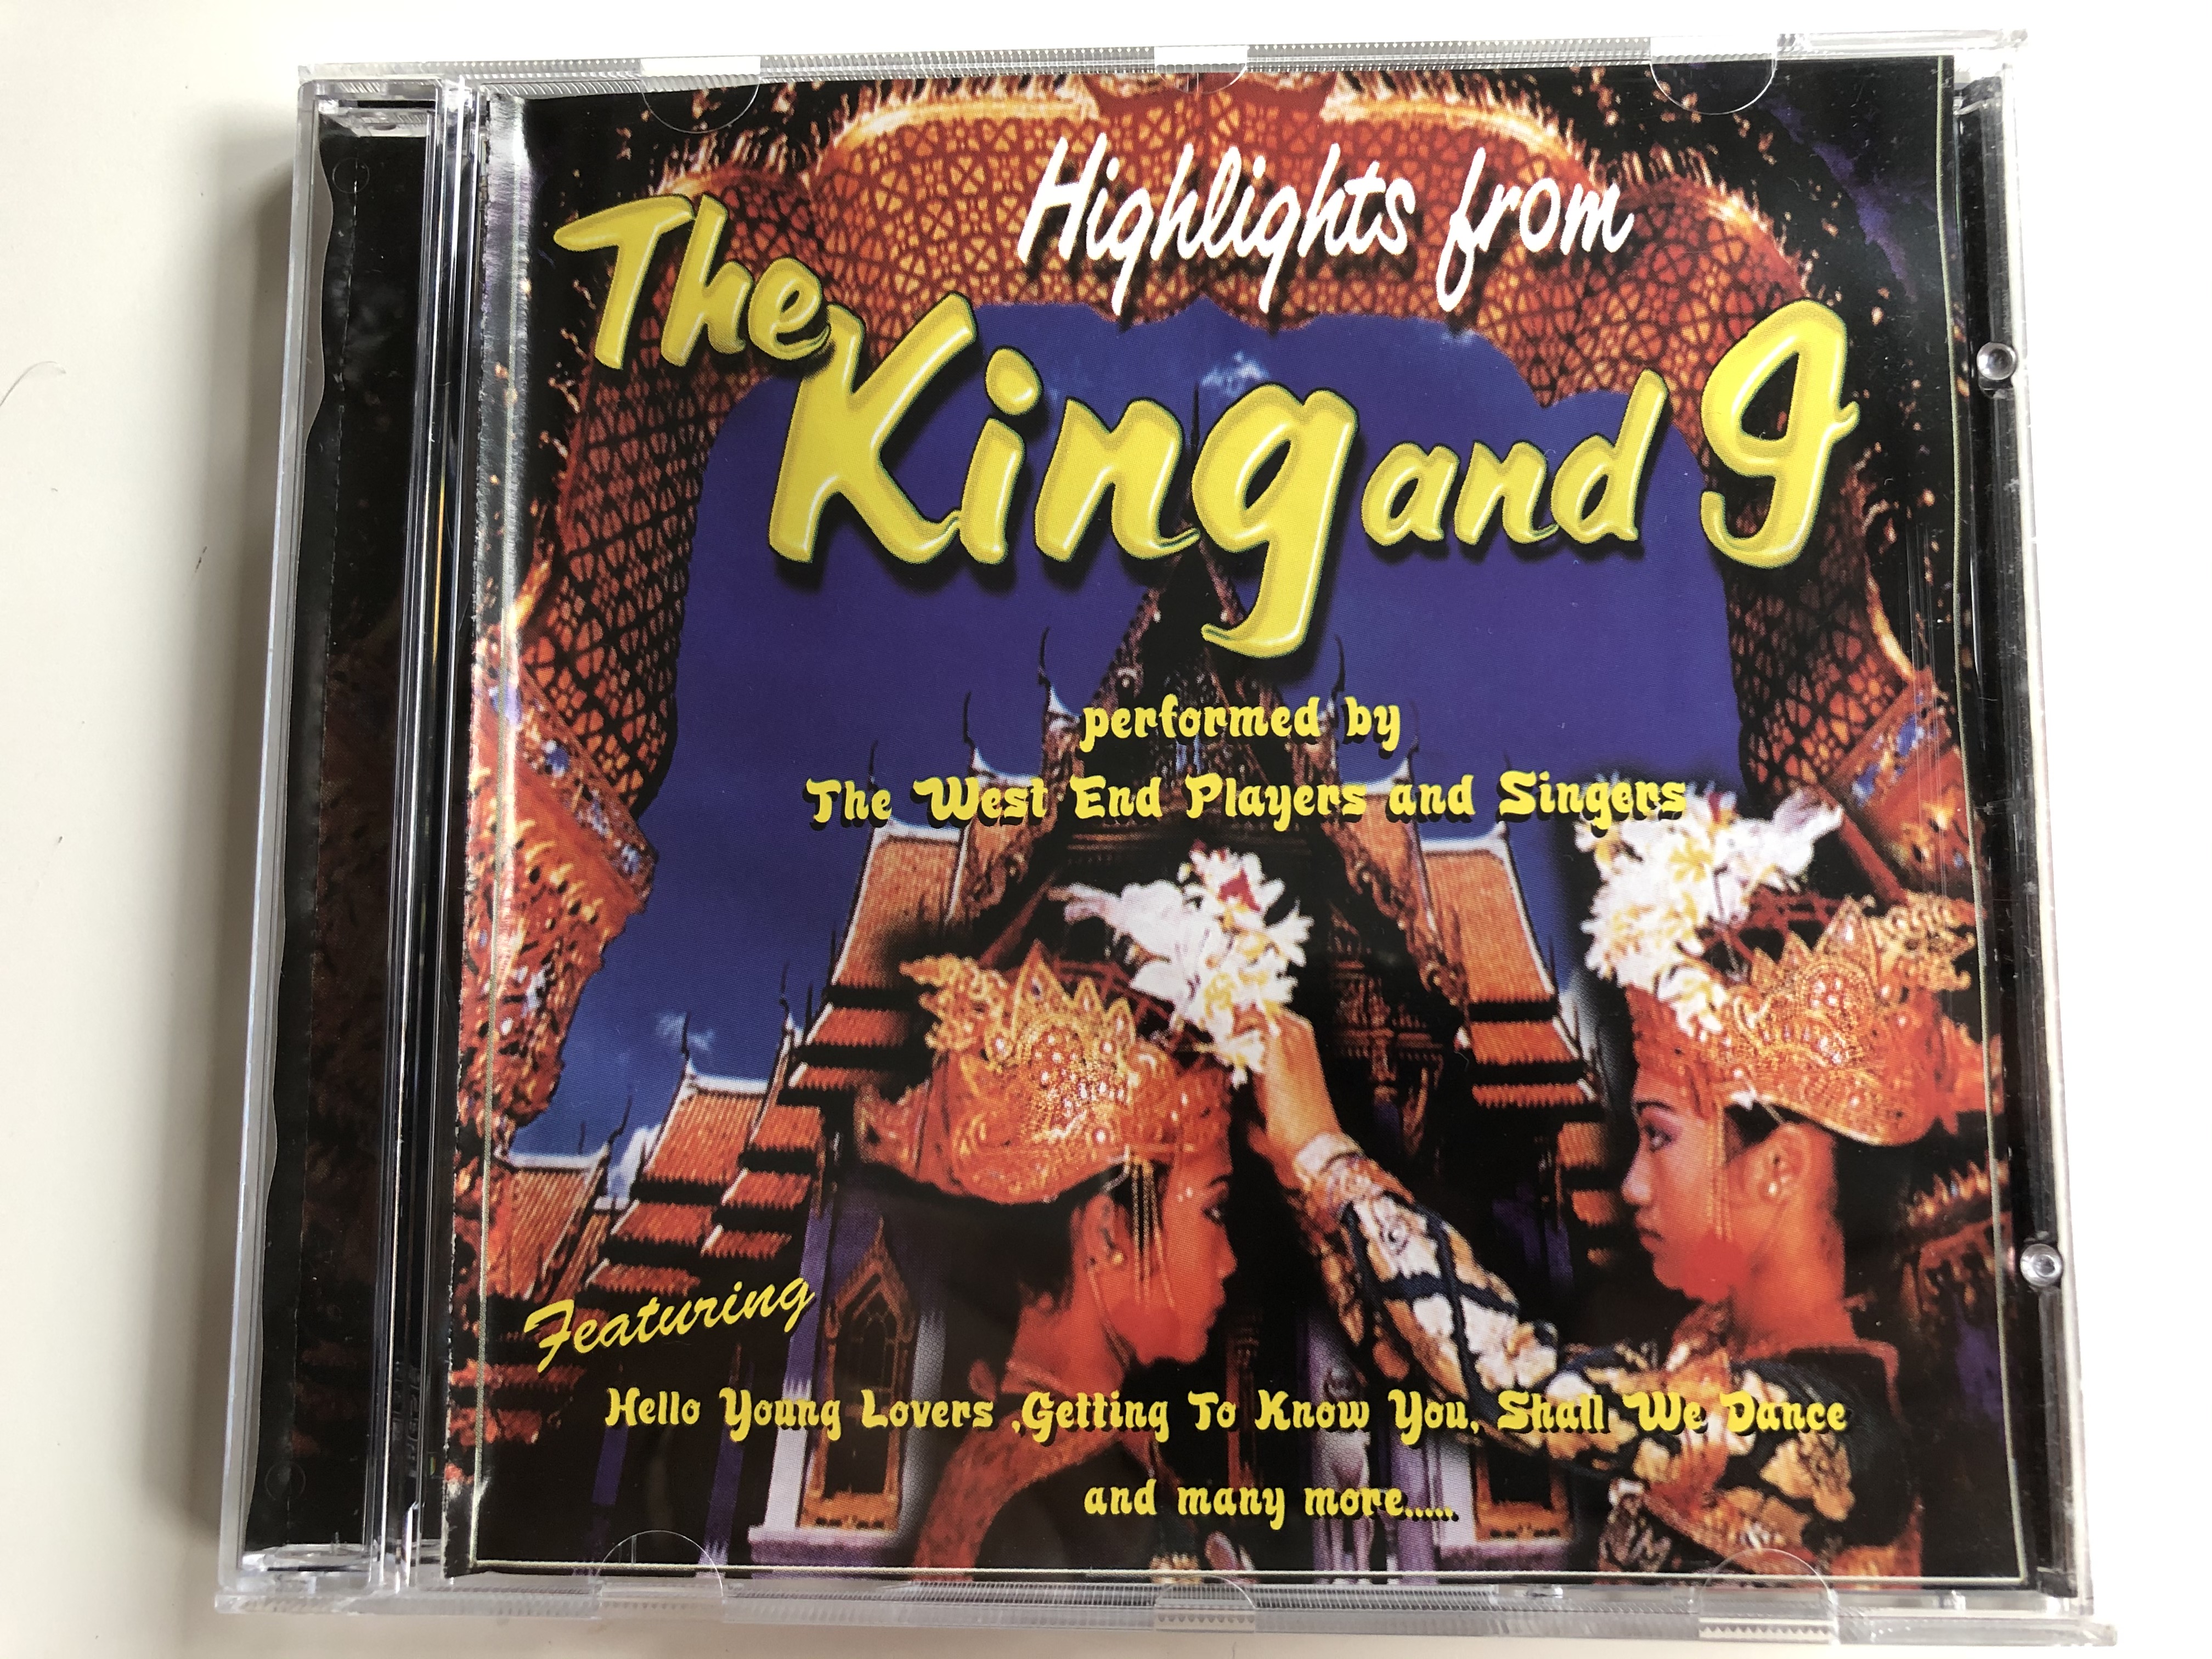 highlights-from-the-king-and-i-performed-by-the-west-end-players-and-singers-featuring-hello-young-lovers-getting-to-know-you-shall-we-dance-and-many-more...-bellevue-audio-cd-2000-10436-1-.jpg